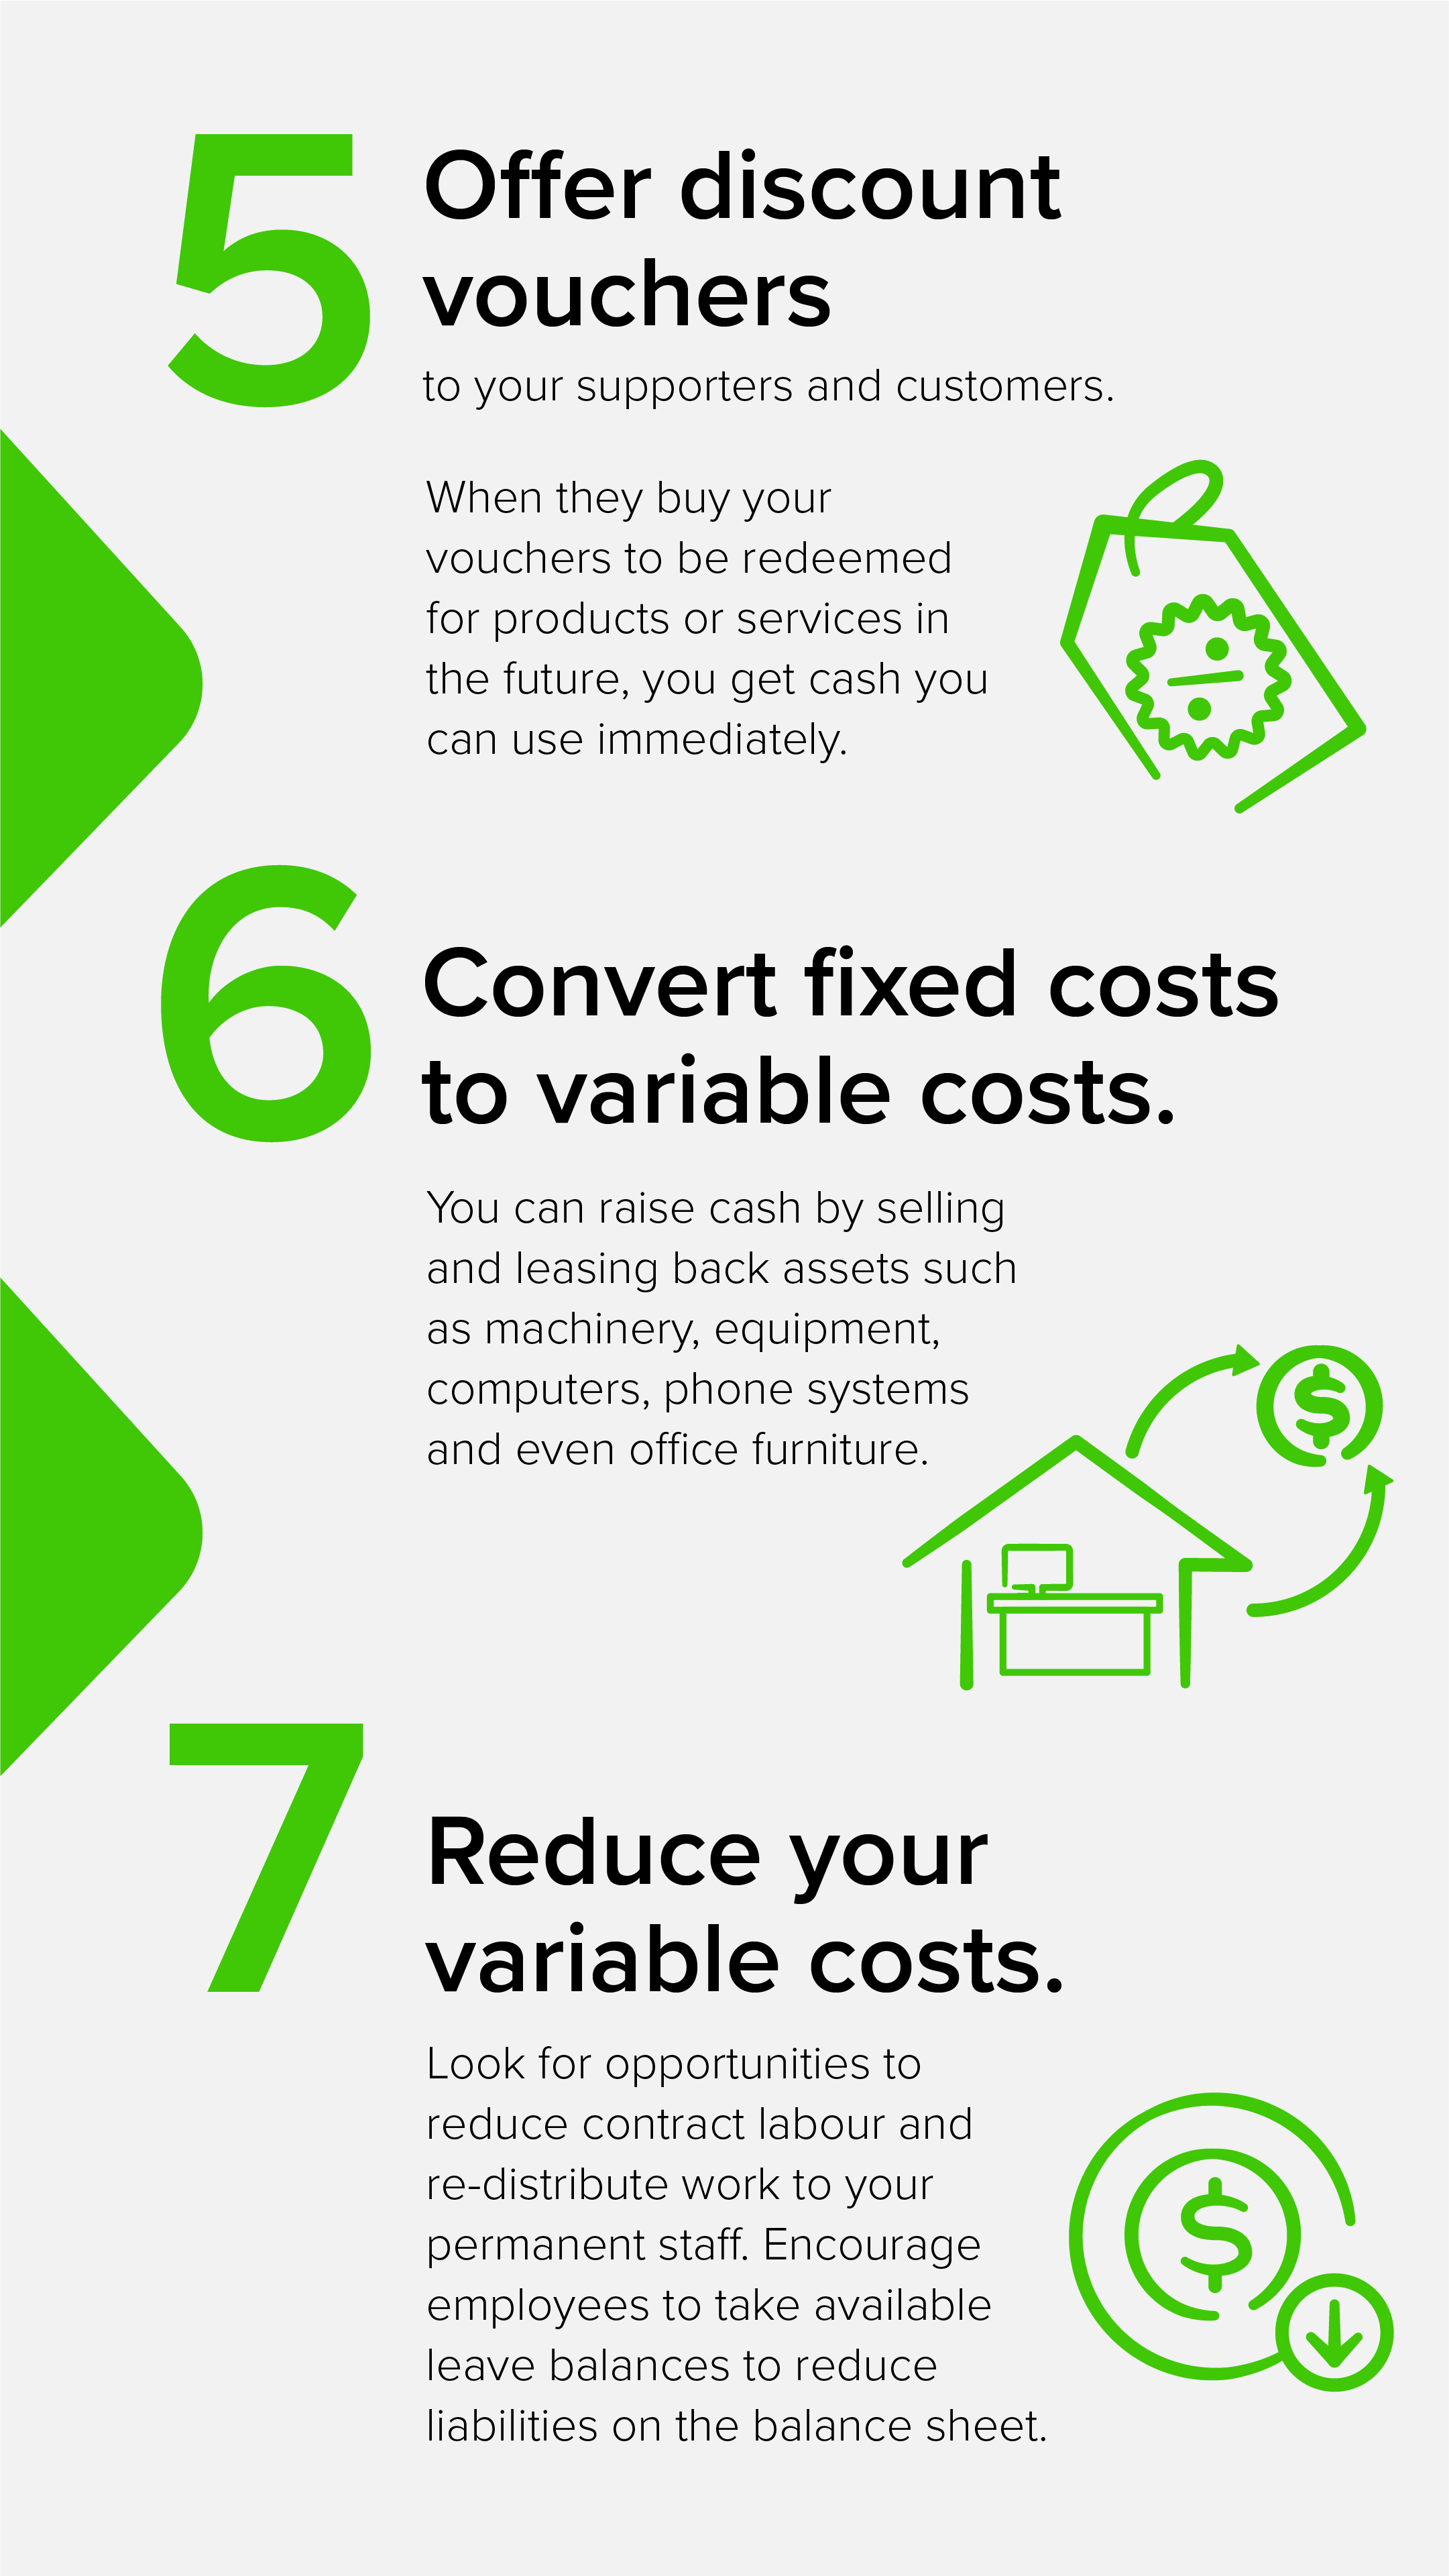 5 Offer dicount vouchers 6 Convert fixed costs to variable costs. 7 Reduce your variable costs.